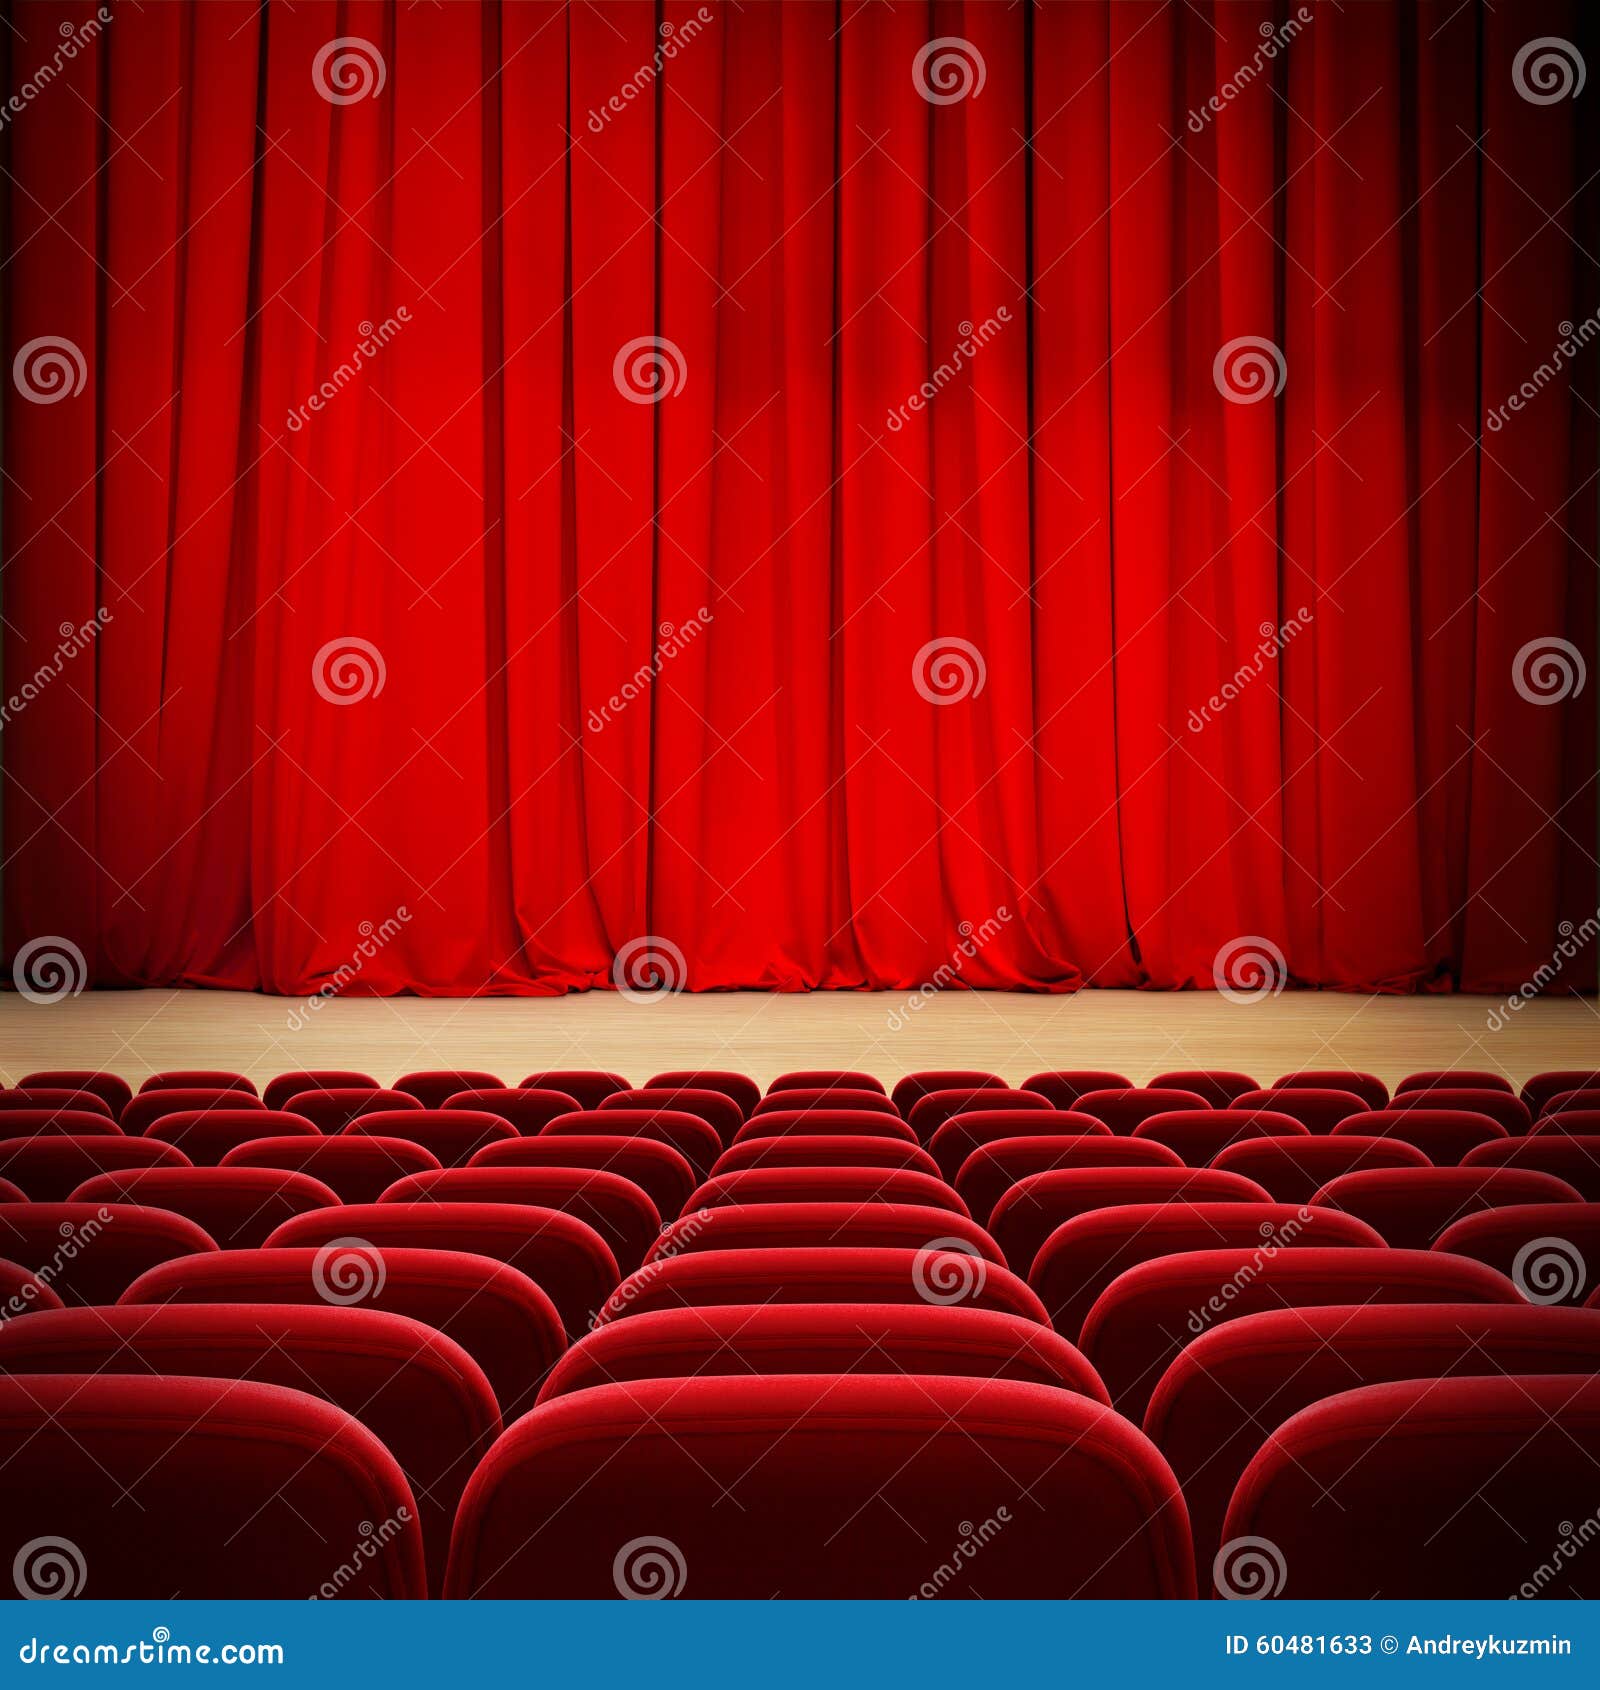 theatre red curtain on stage with red velvet seats